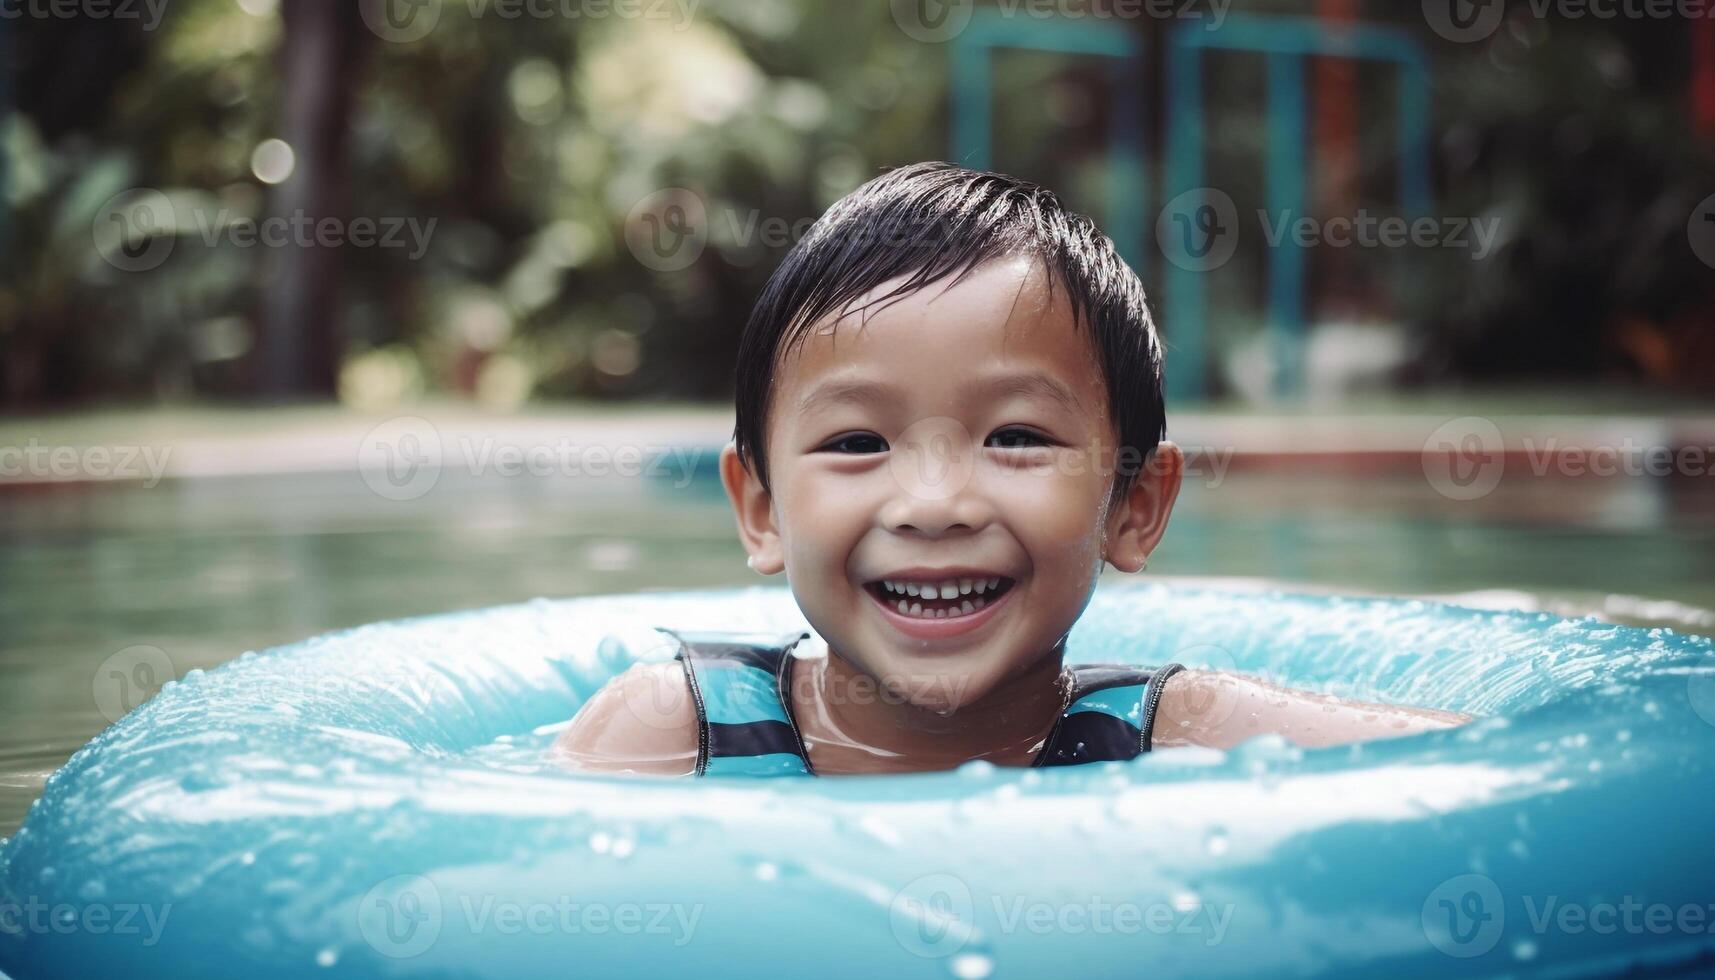 Smiling toddler enjoys fun in the pool generated by AI photo